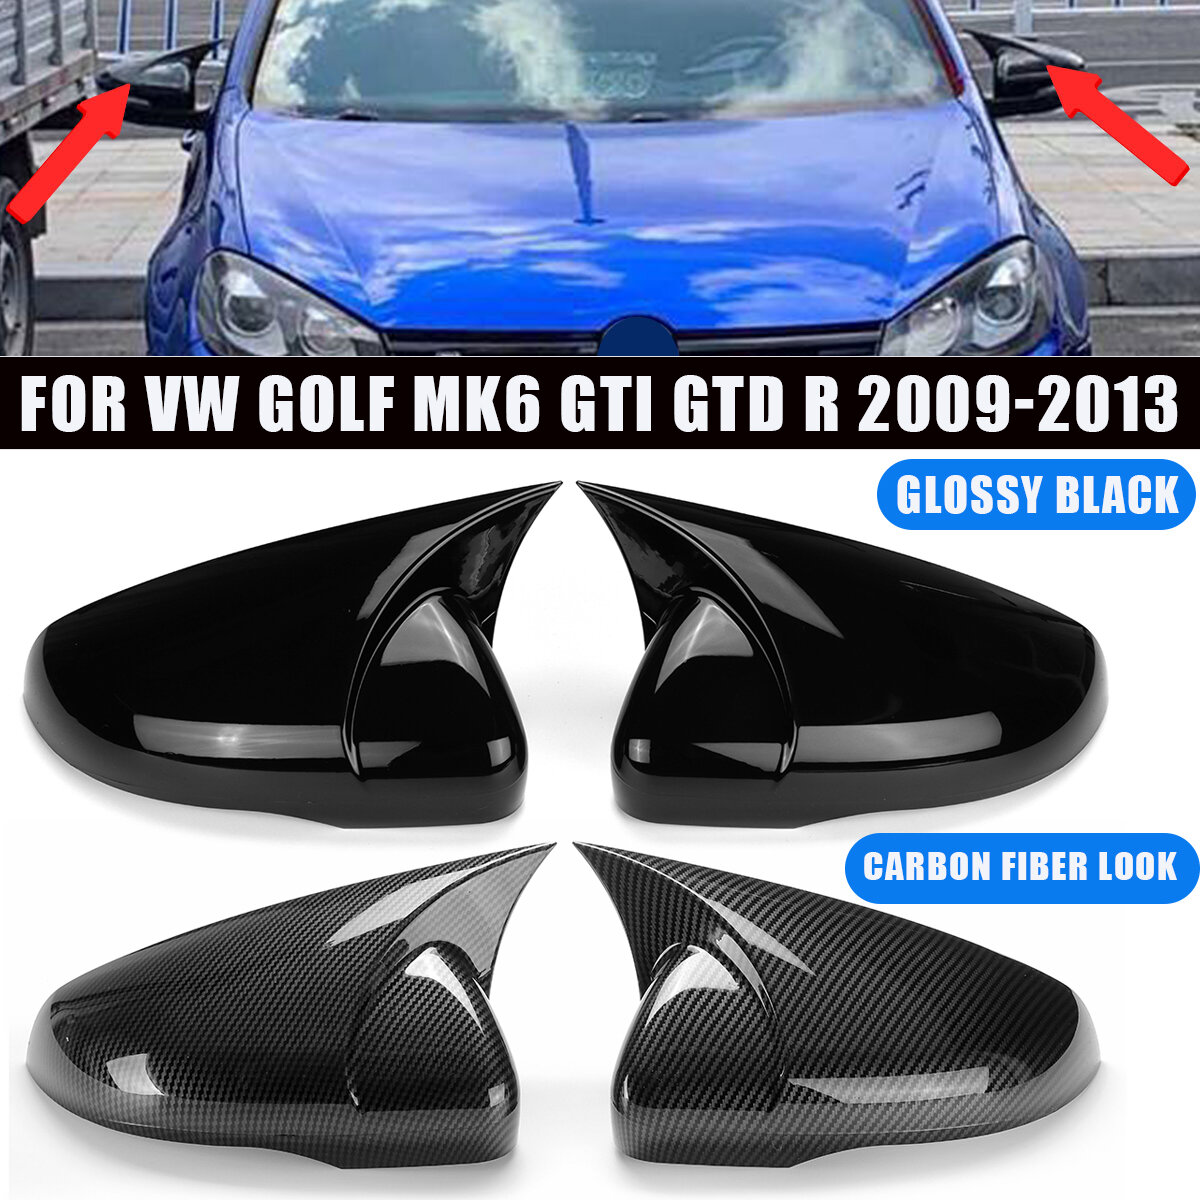 Pair Rear View Mirror Cap Cover Direct Add-On Left & Right For VW Golf MK6 GTI GTD R 2009-2013